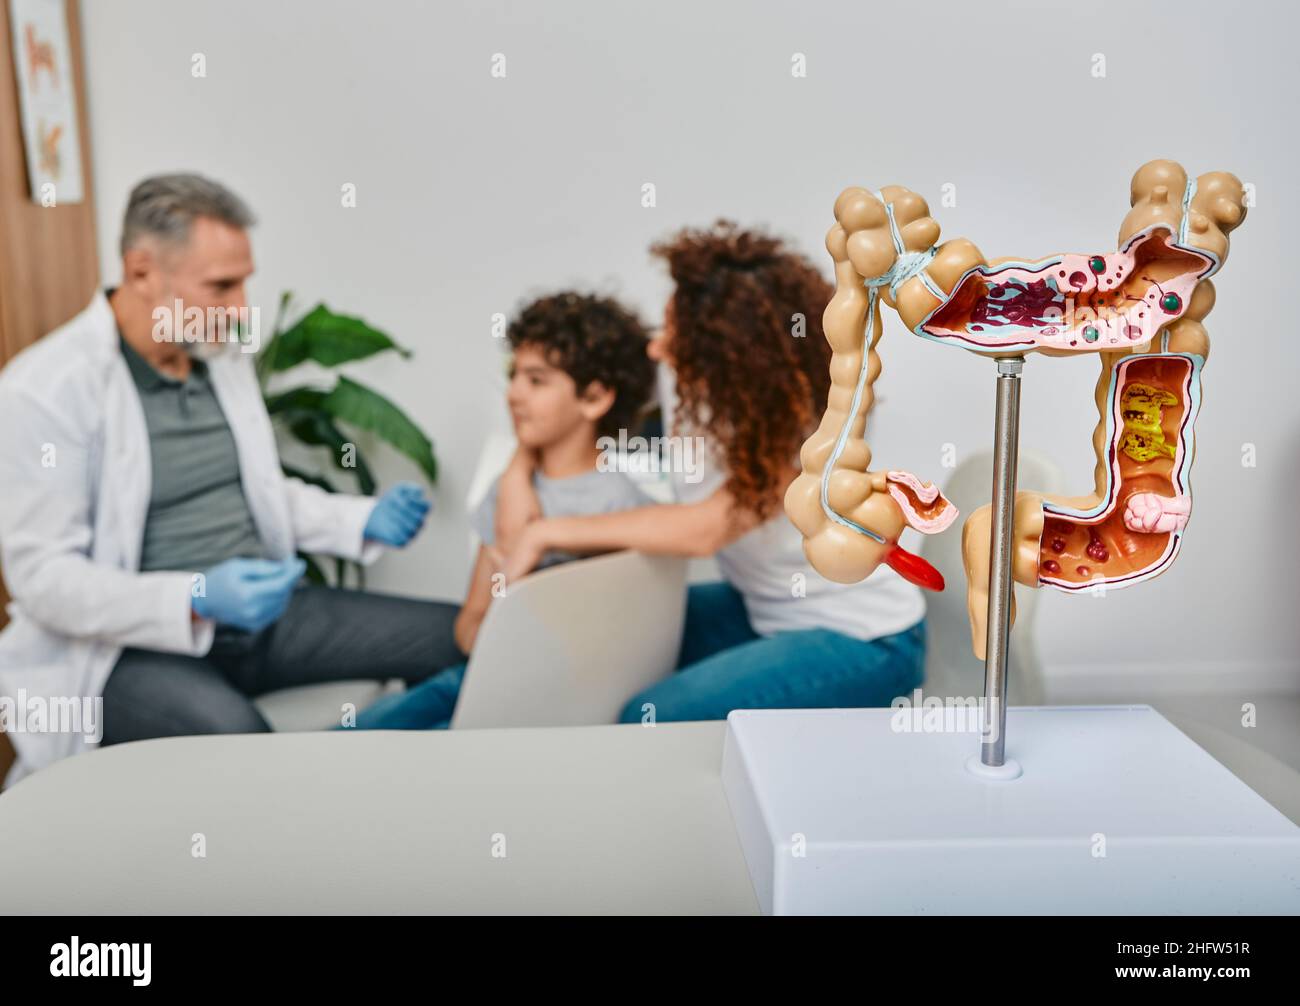 Consultation gastroenterologist for child patient. Anatomical intestines model on doctor table in foreground Stock Photo